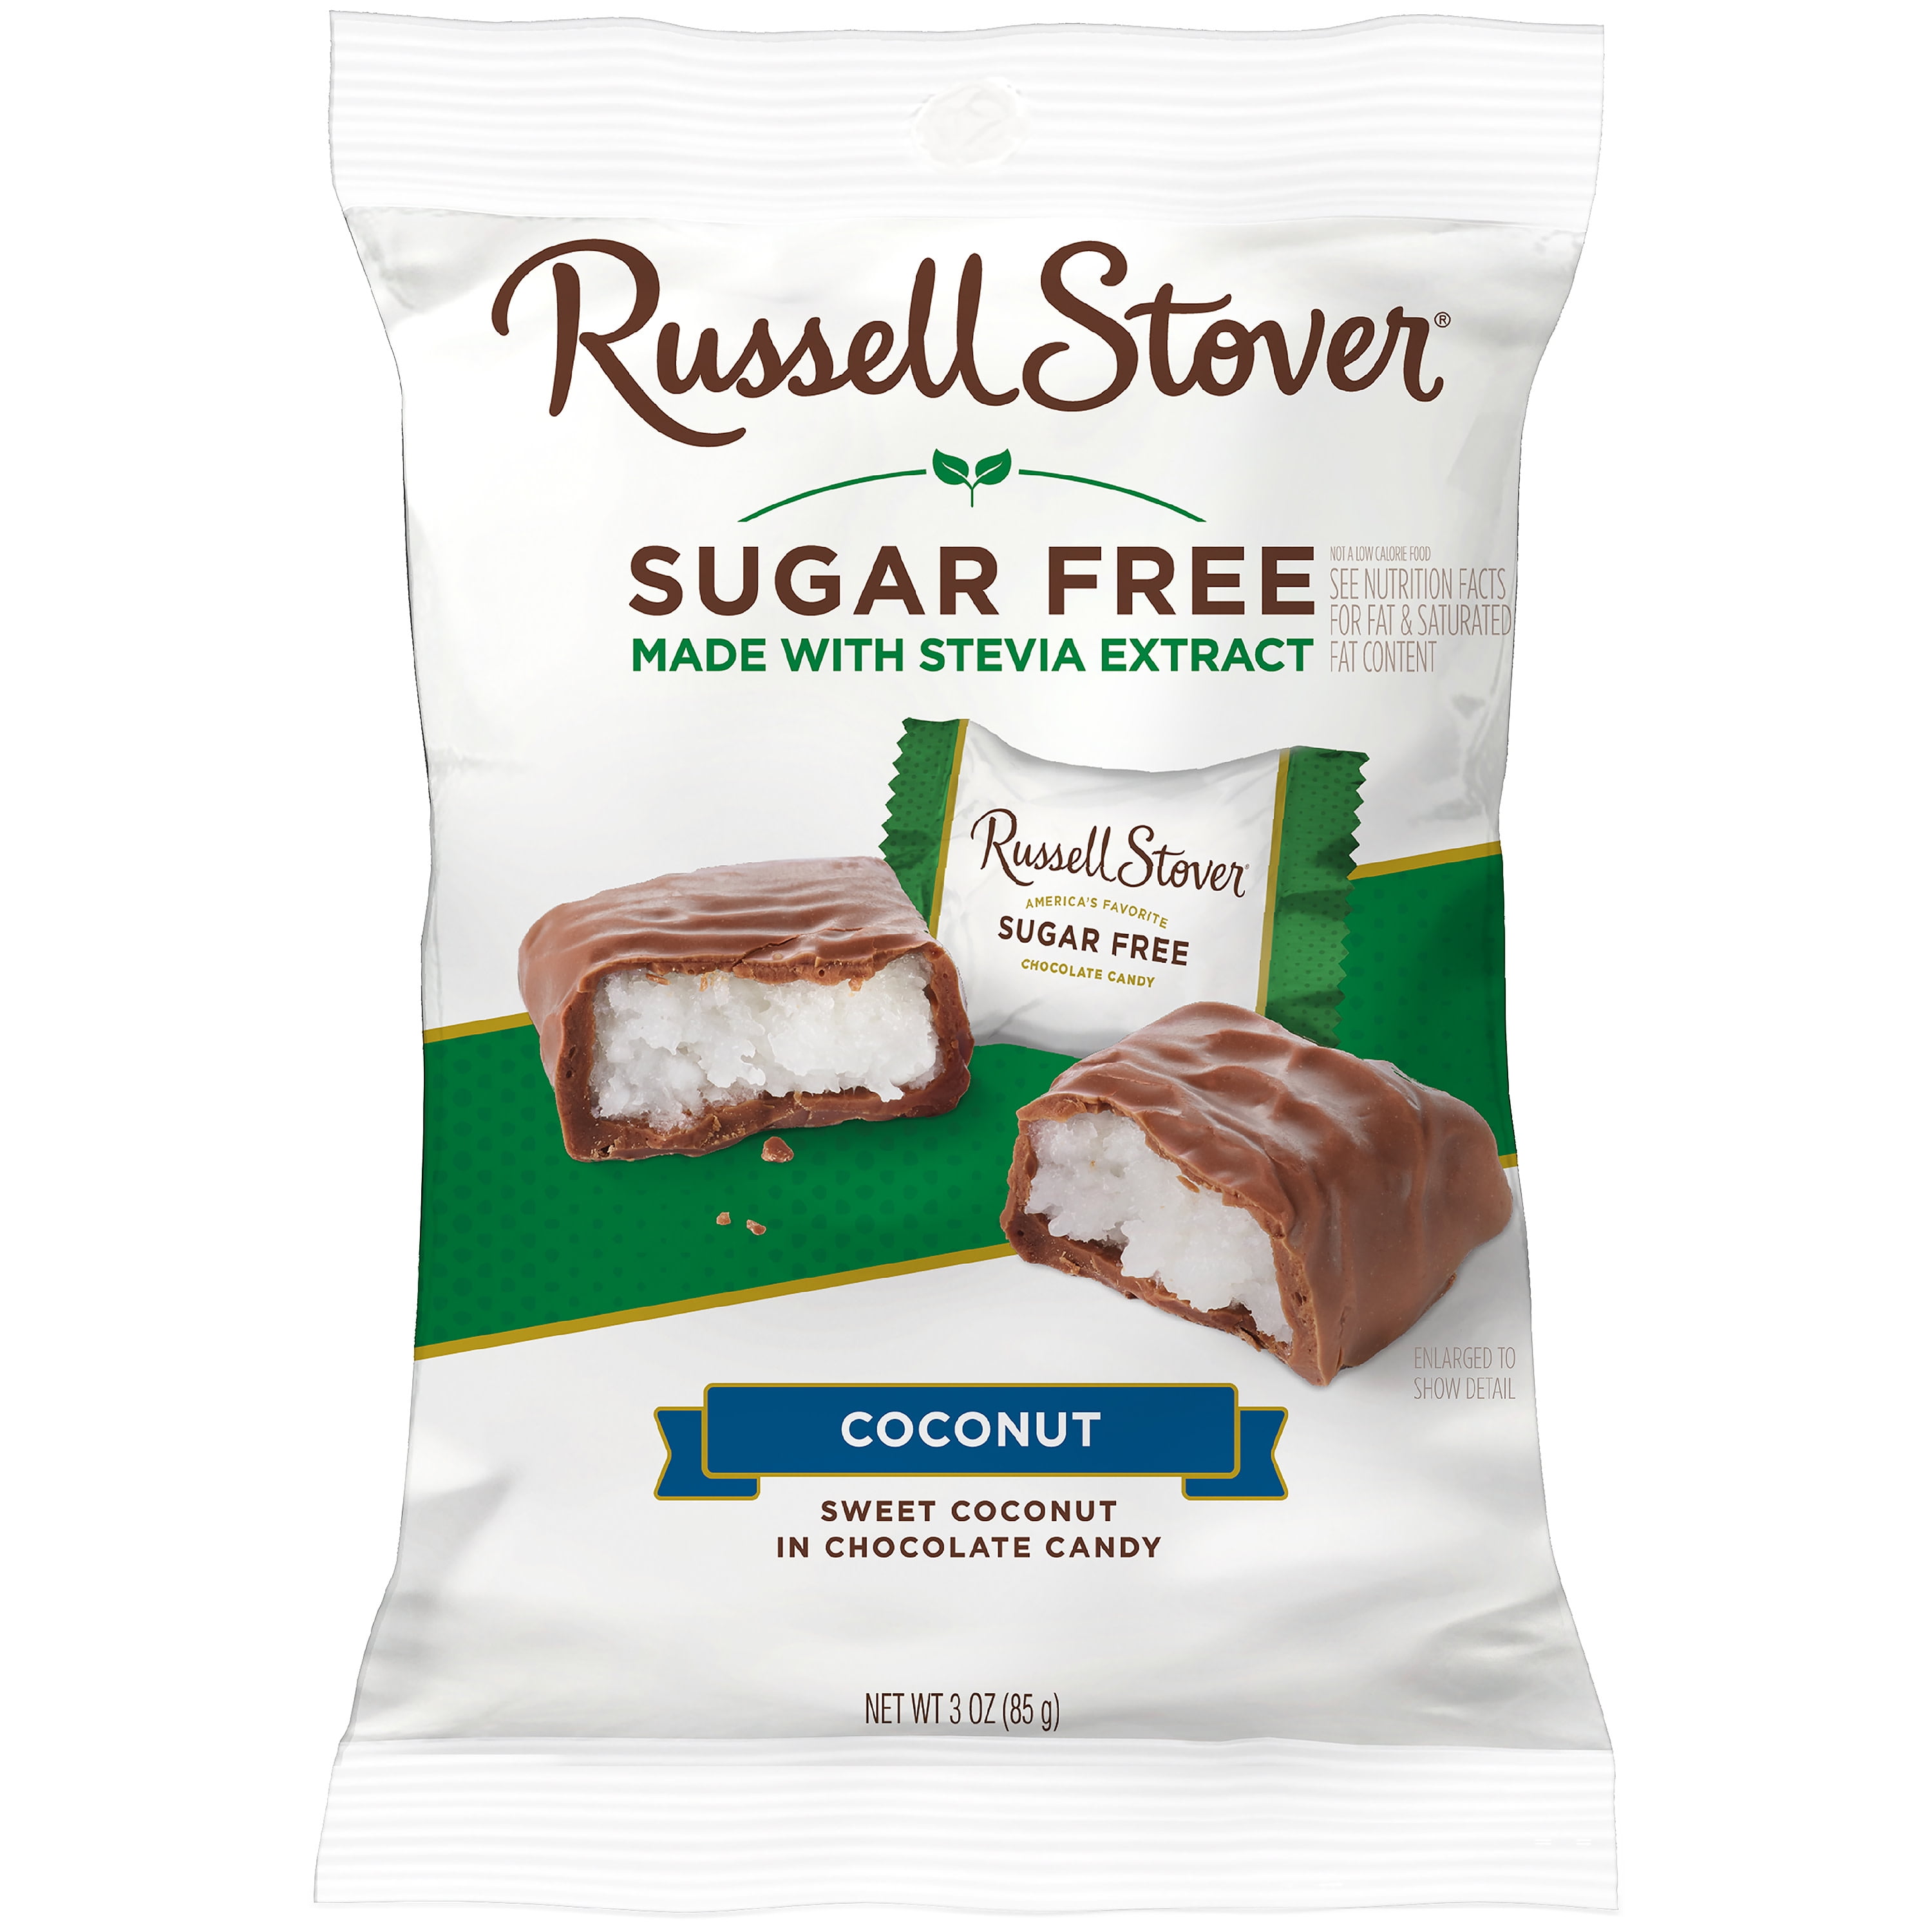 RUSSELL STOVER Sugar Free Dark Chocolate Candy, 3 oz. bag (≈ 6 pieces)